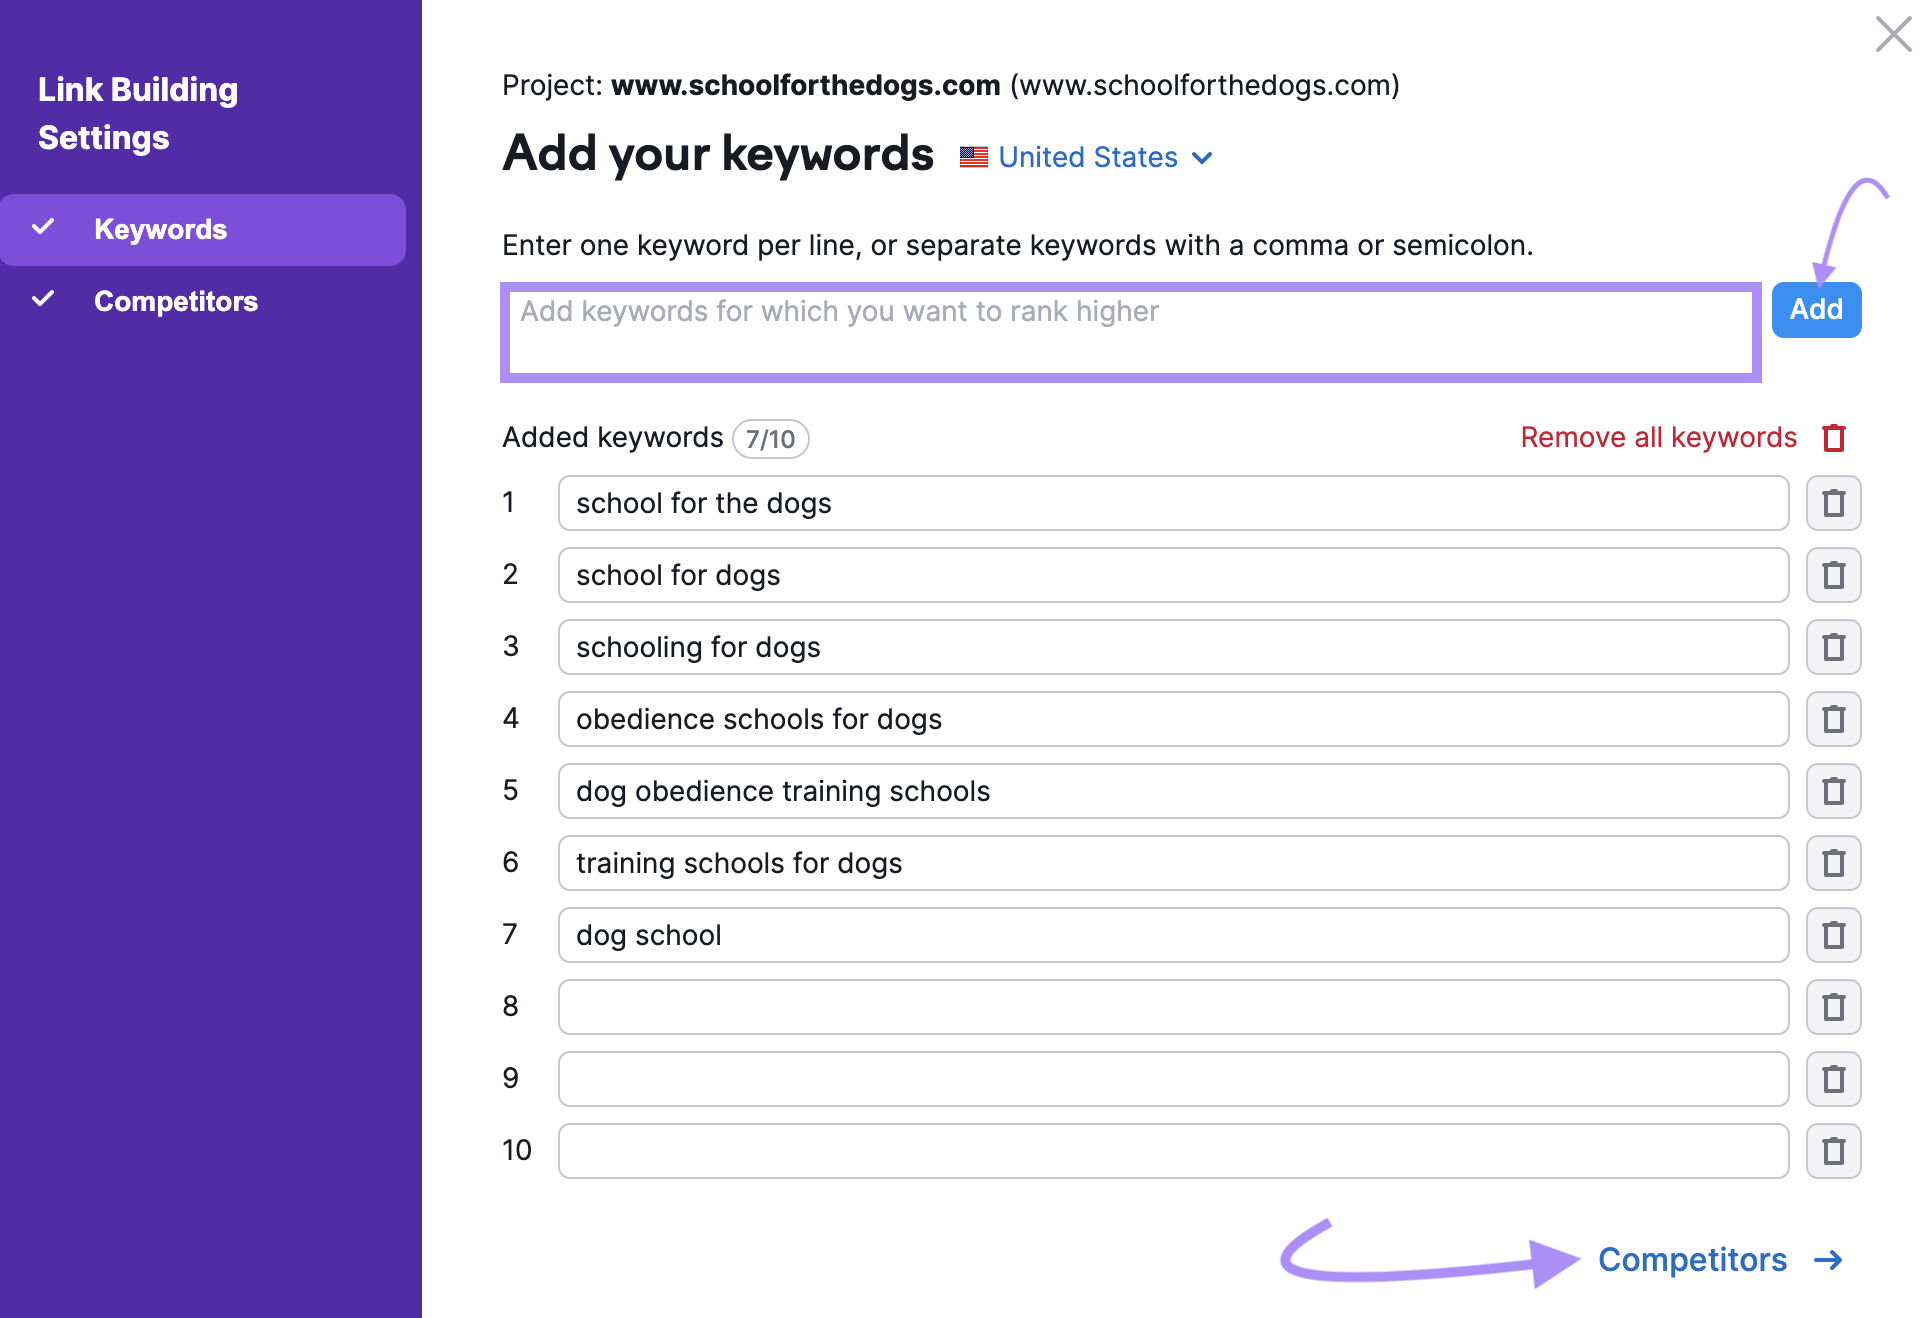 "Add your keywords" window in Link Building Settings